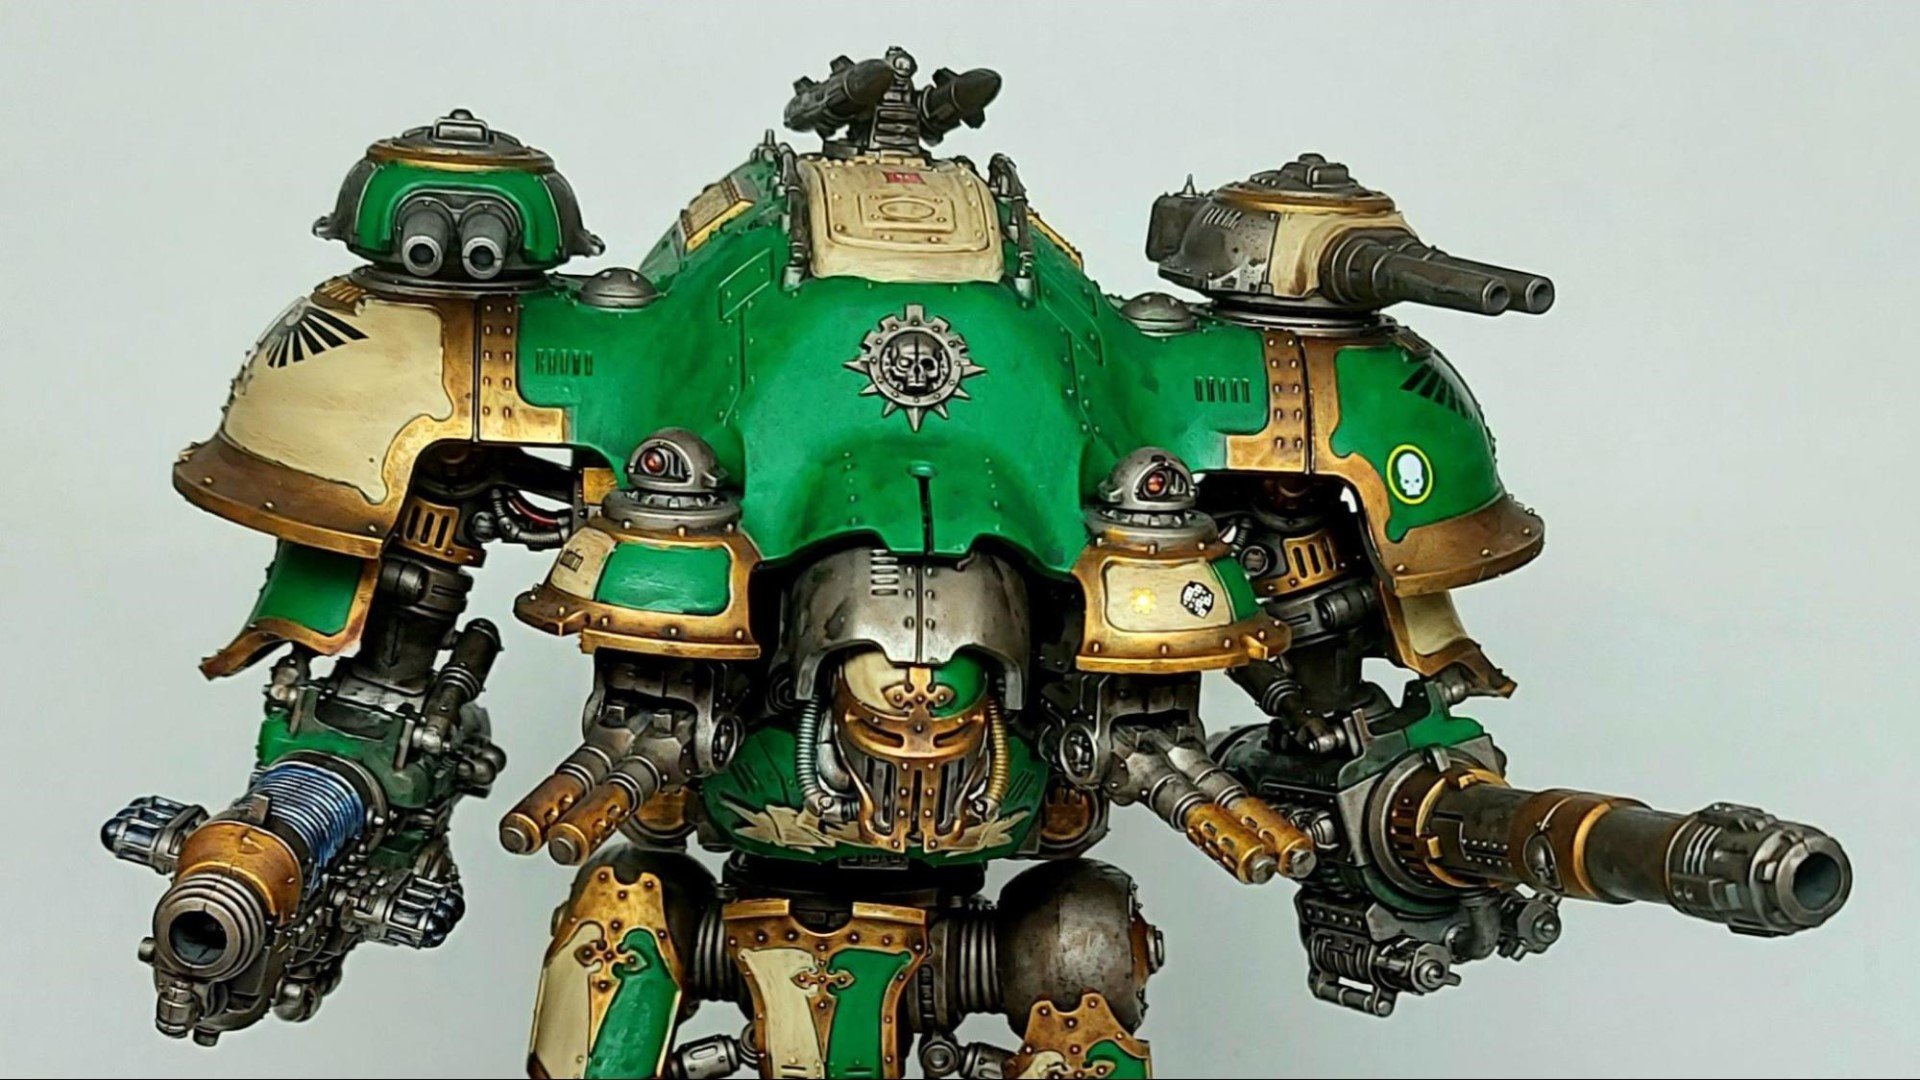 Warhammer 40k Imperial Knights army guide - Photo provided to the author by Stephen Reynolds showing an Imperial Knight Castellan in green and cream paint scheme